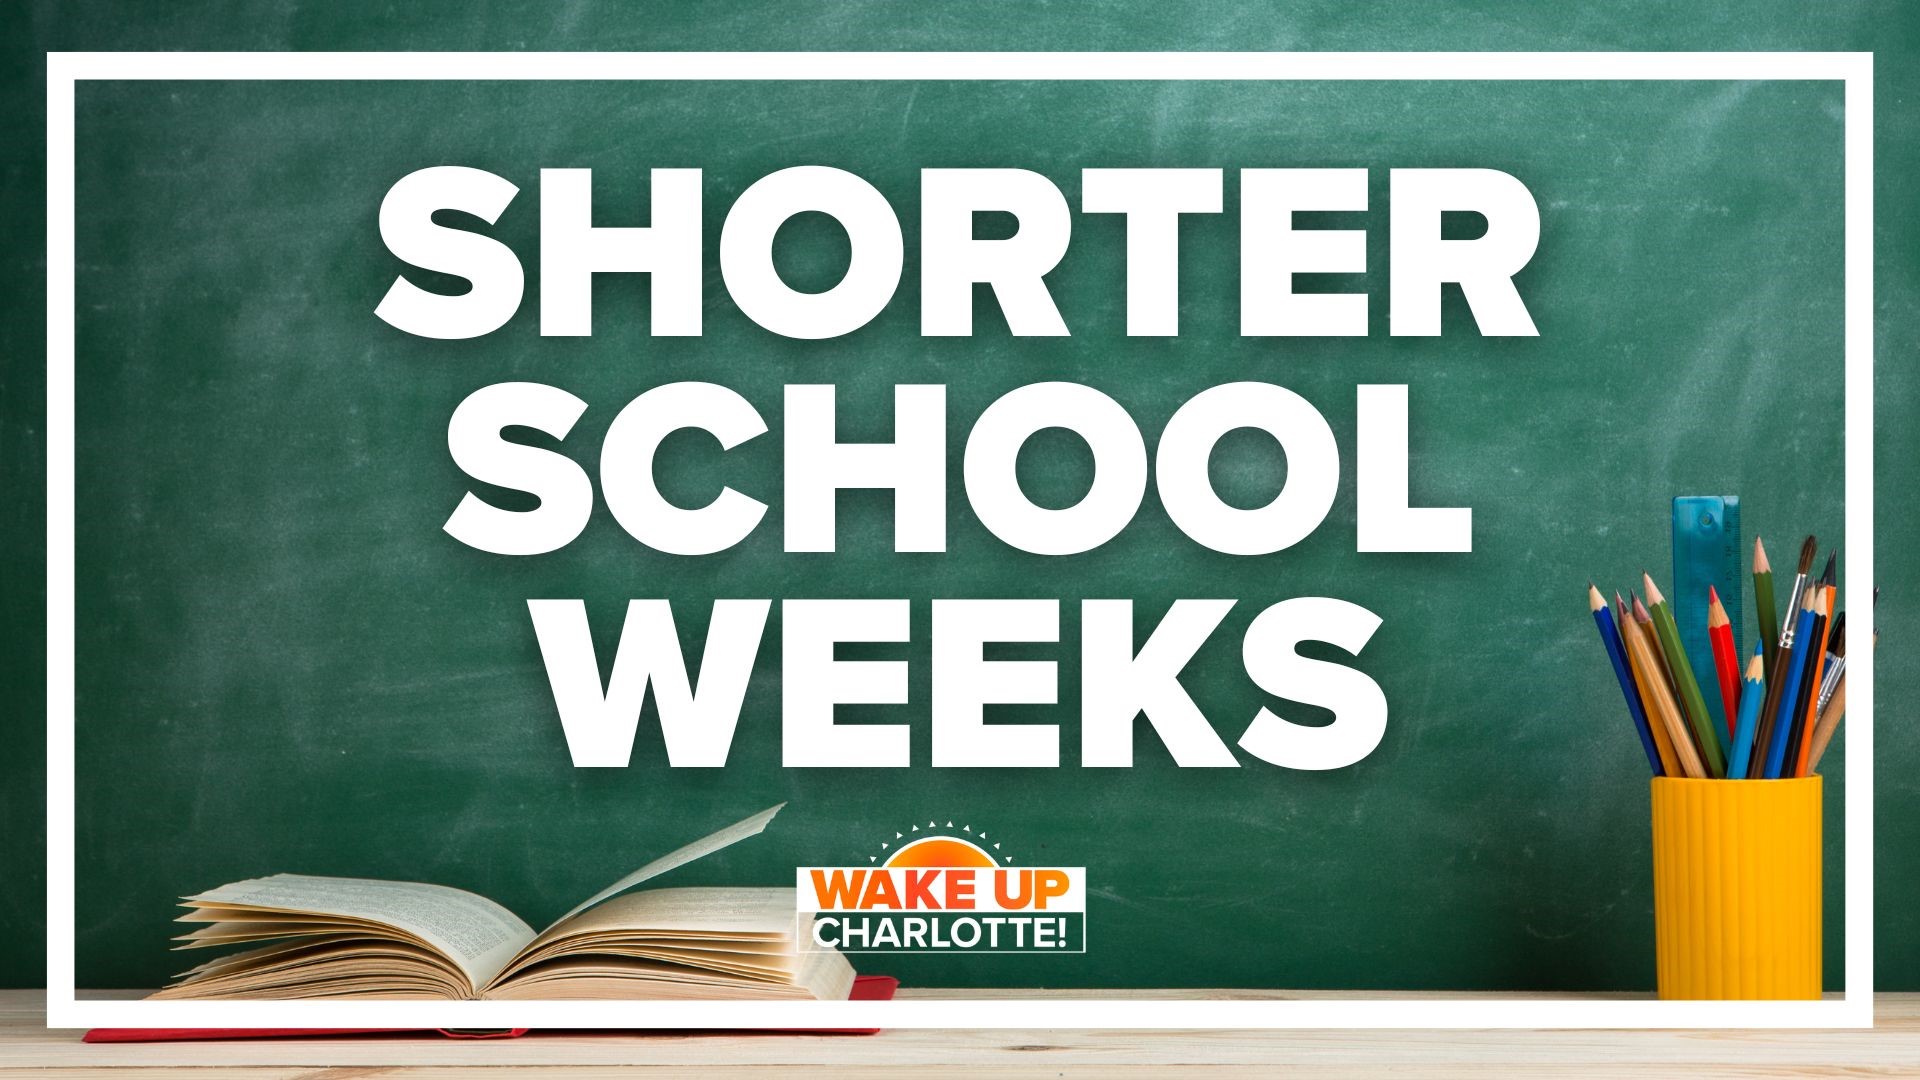 Most of us would love a shorter workweek, especially kids. Now, more schools are turning to four-day weeks.